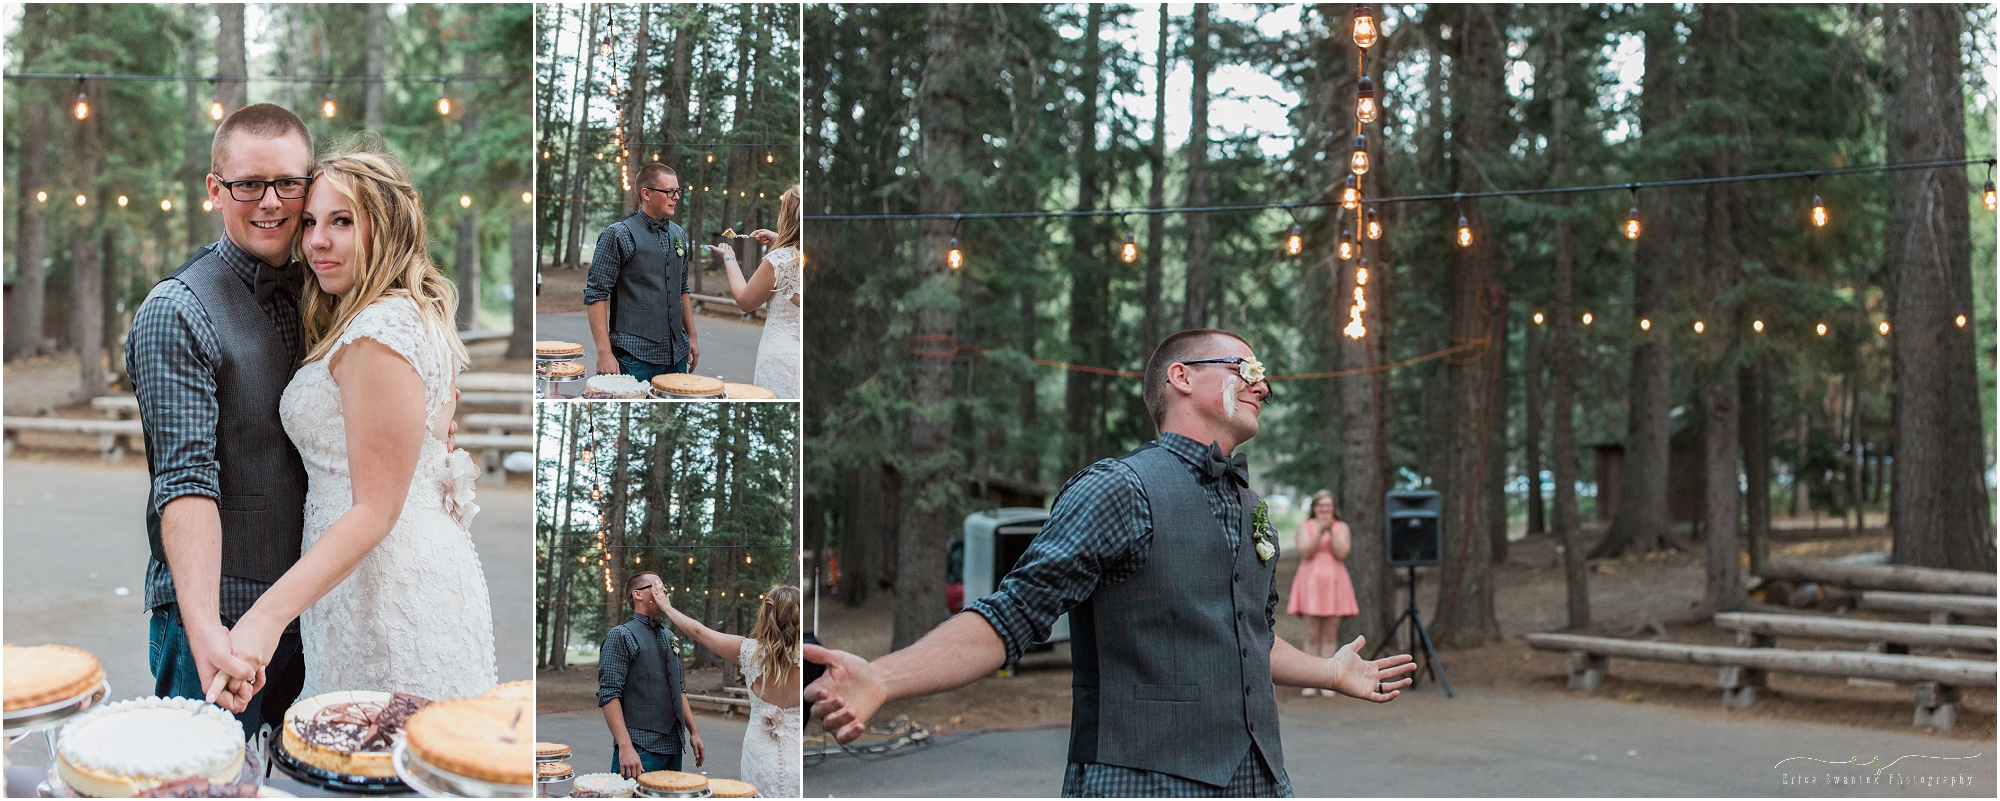 A bride and groom smash pie into each other's faces at this outdoor rustic Oregon lodge wedding near Bend, Oregon. 